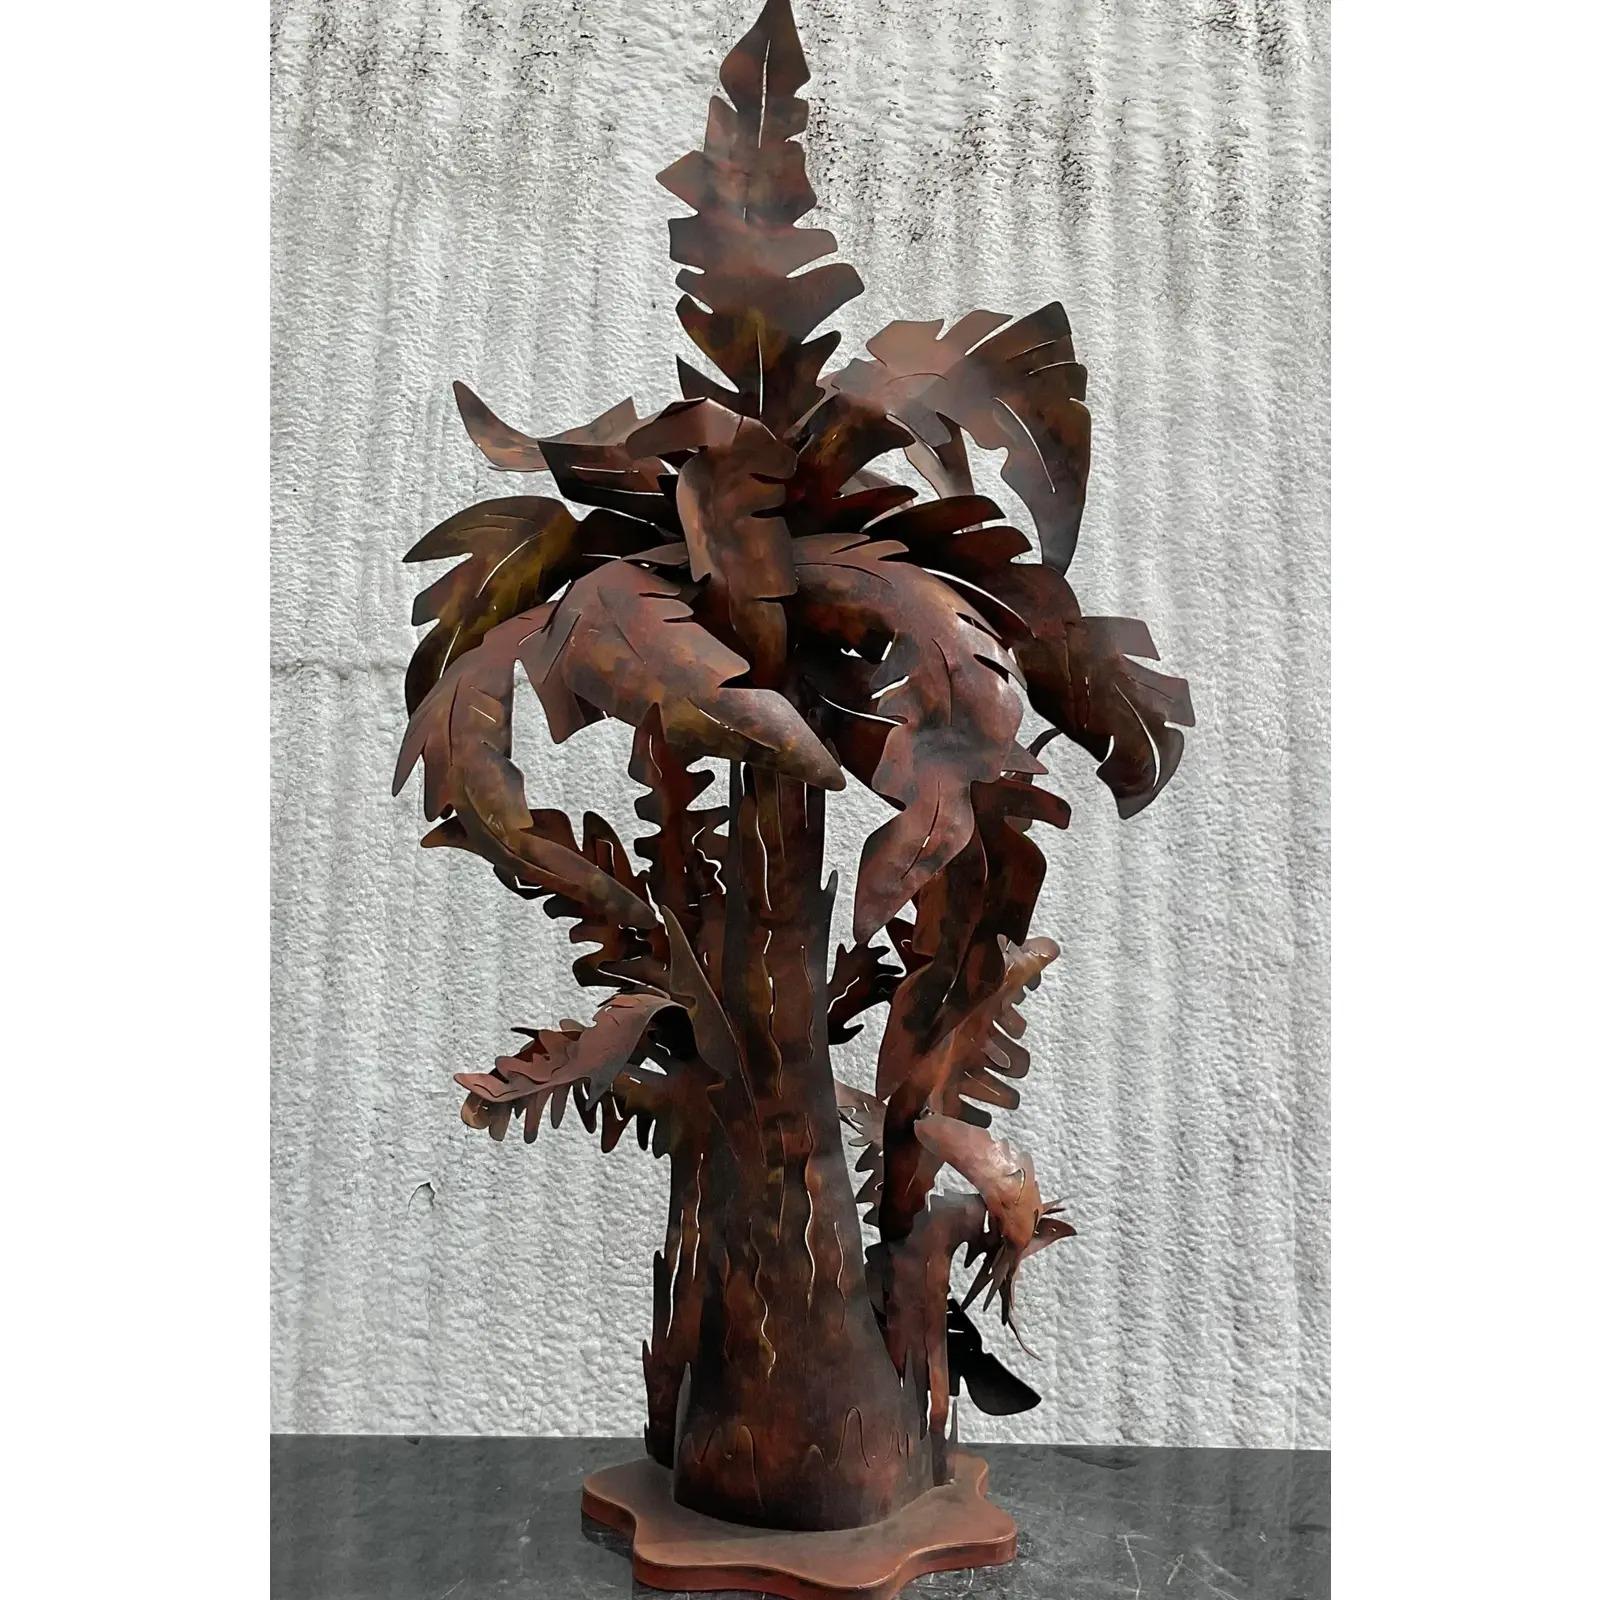 North American Vintage Monumental Patinated Punch Cut Palm Tree Lamp For Sale